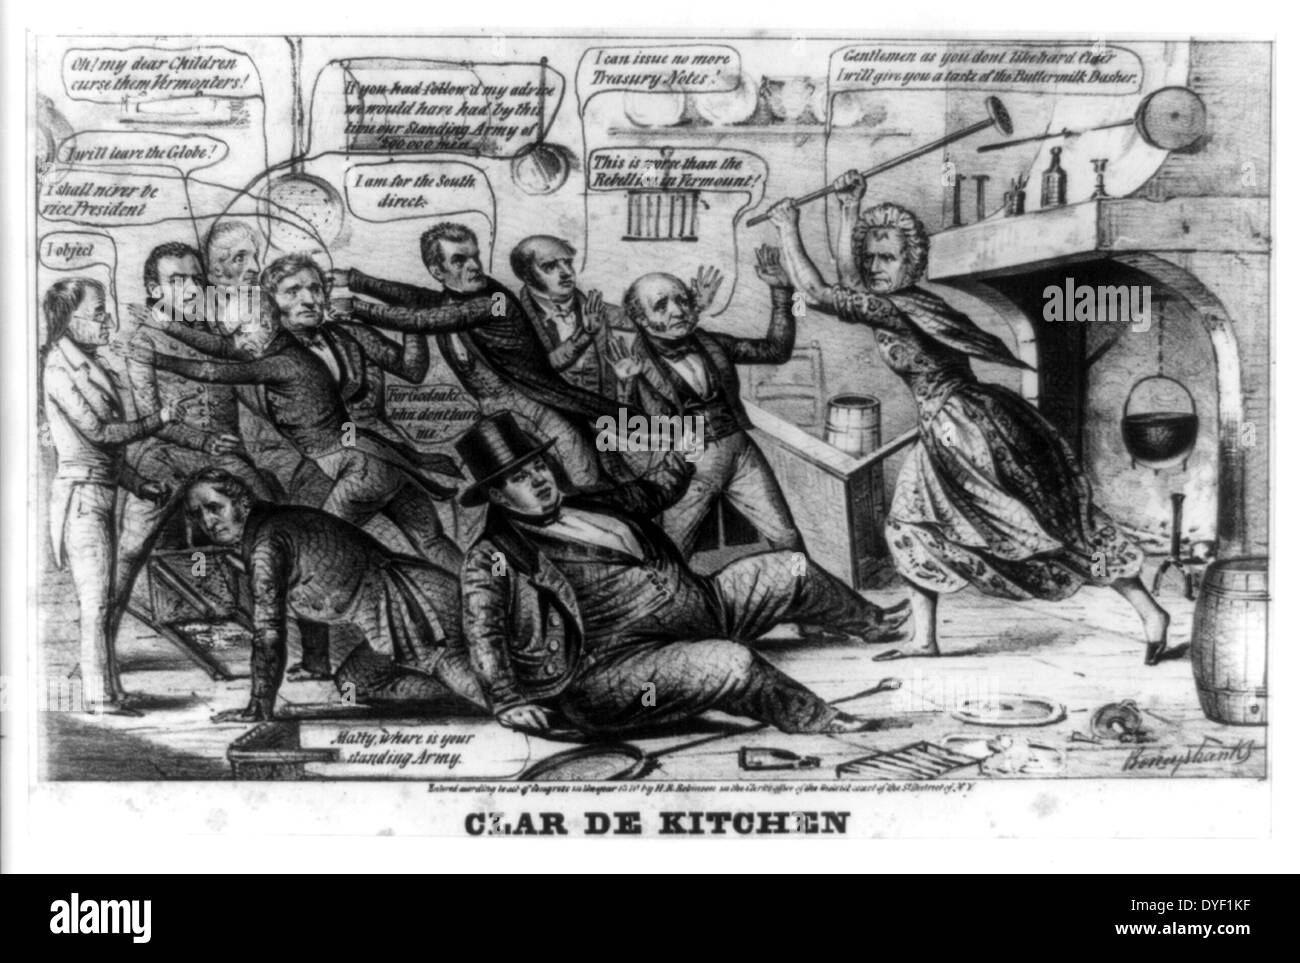 Clar de kitchen by Napoleon Sarony & Henry R. Robinson, circa 1840. Lithograph print on wove paper. Political cartoon satirising the Whig campaign of the time. Whig candidate William Henry Harrison is shown as a scullery maid attacking Democrat Van Buren and his advisers with a buttermilk dasher. Stock Photo